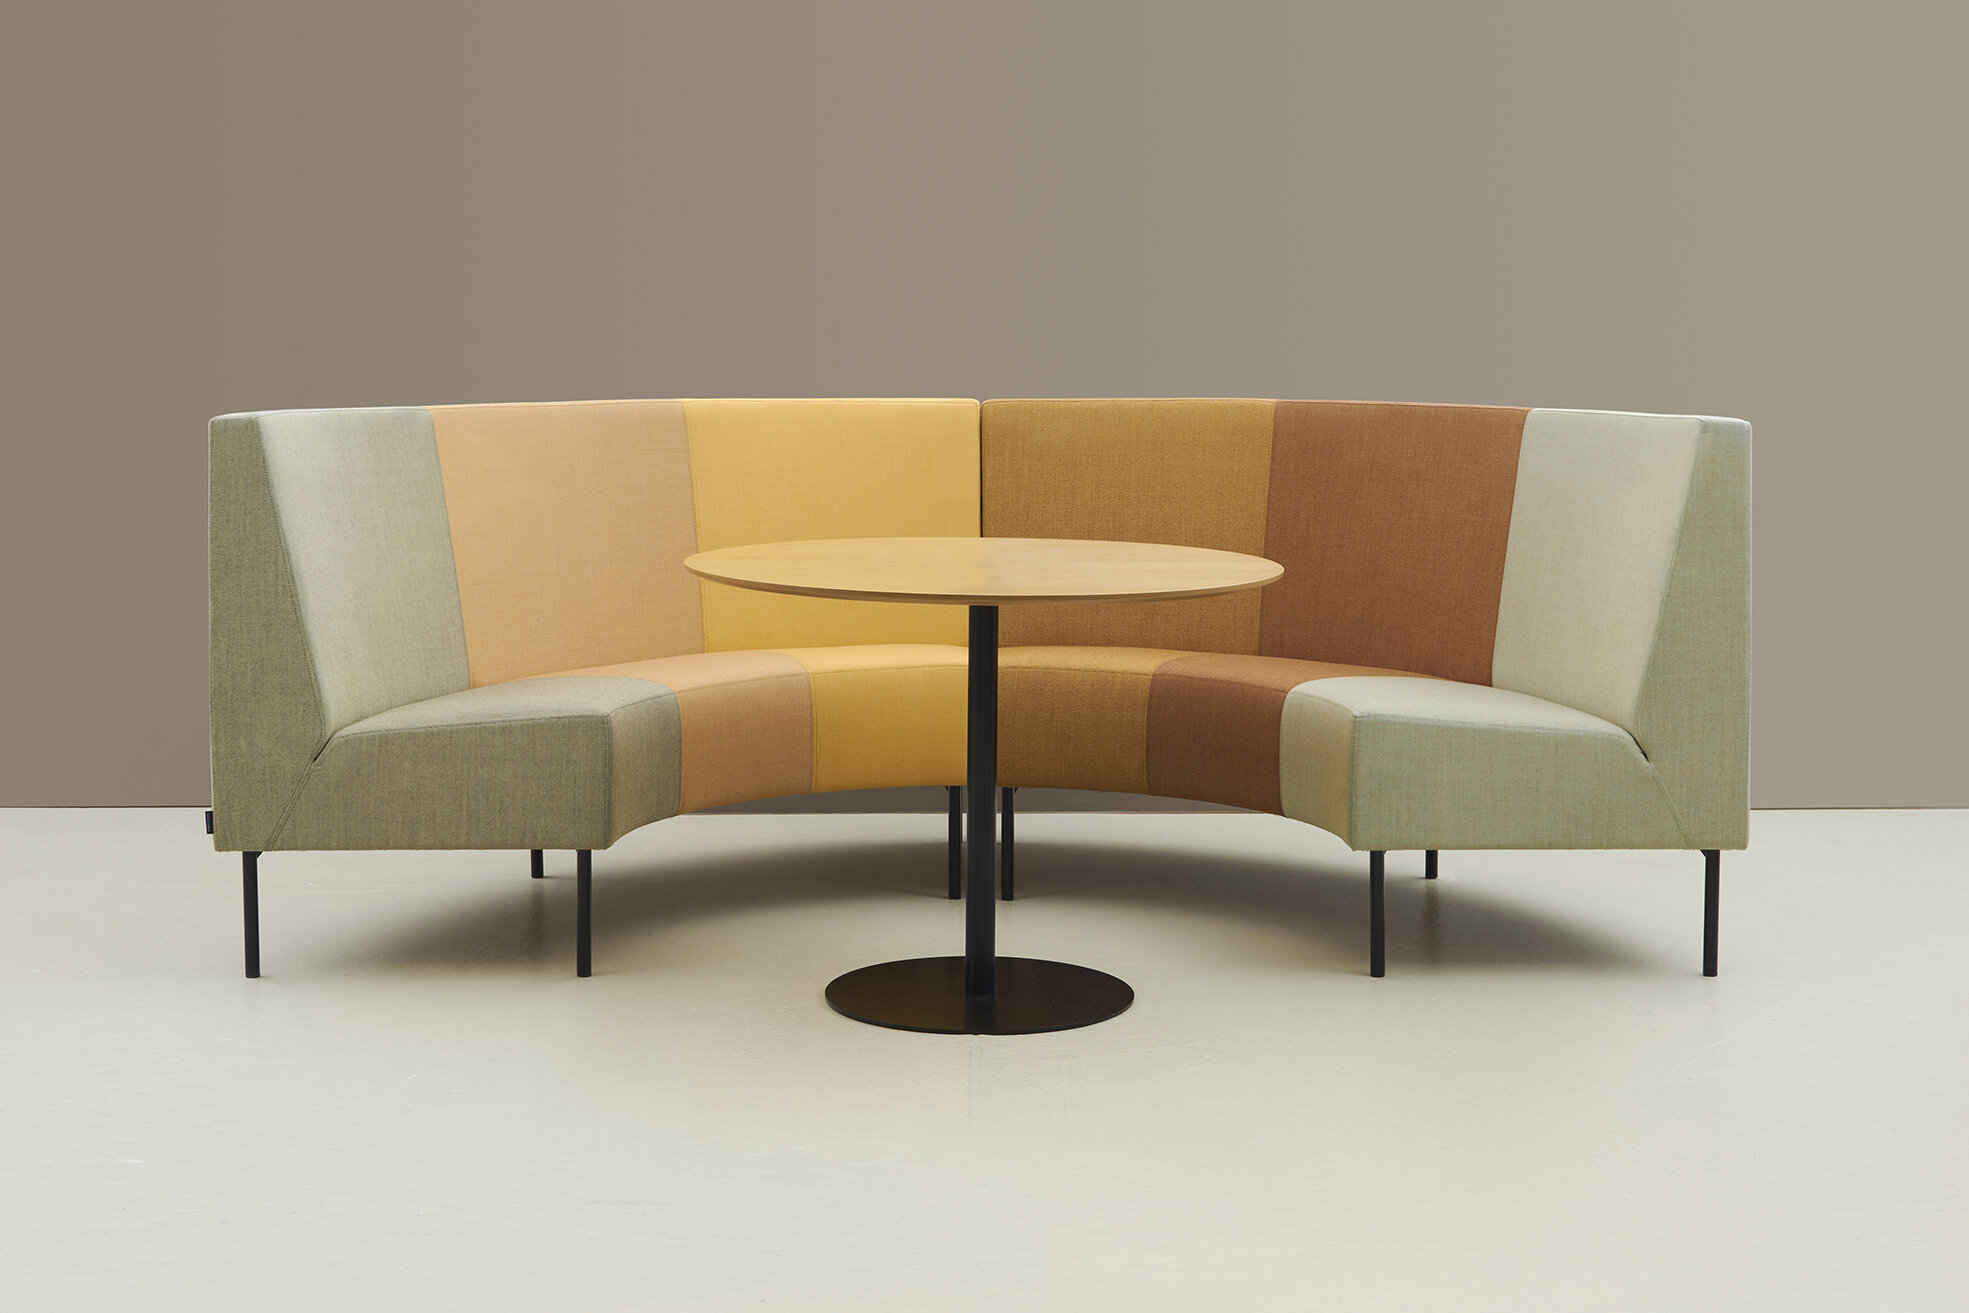 hm19n1 curved sofa and hm20v table (1) (low res).jpg